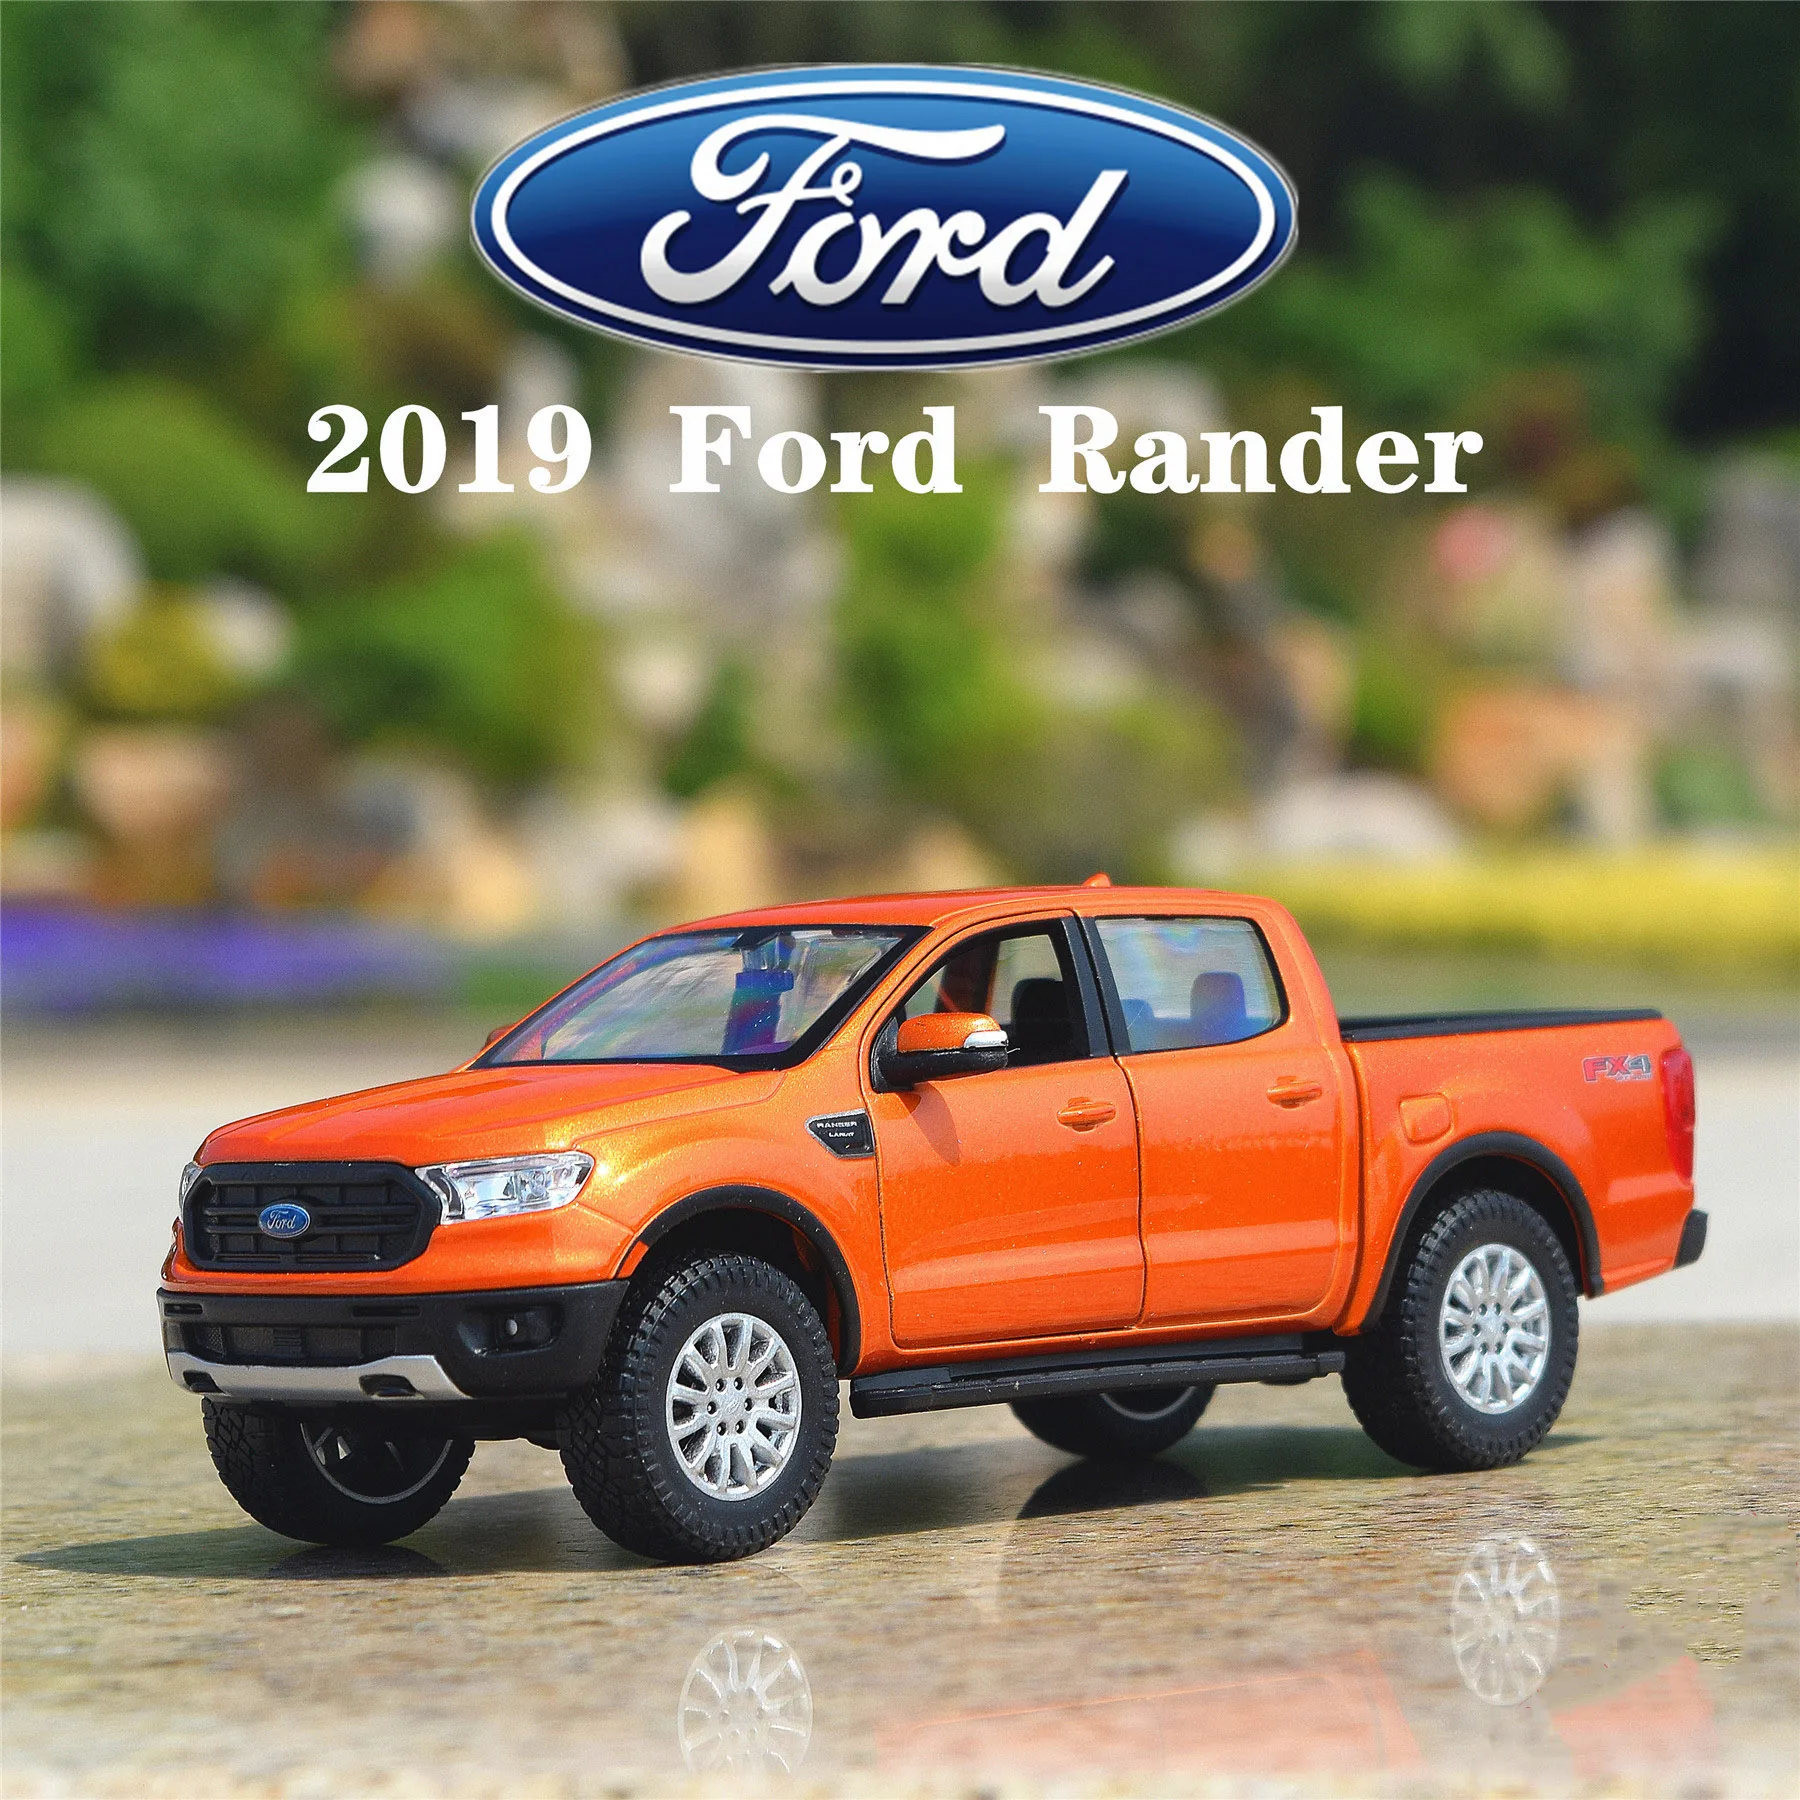 

Maisto 1:27 2019 Ford Ranger Pickup Alloy Car Model Diecast Metal Toy Vehicle Car Model High Simulation Collection Children Gift